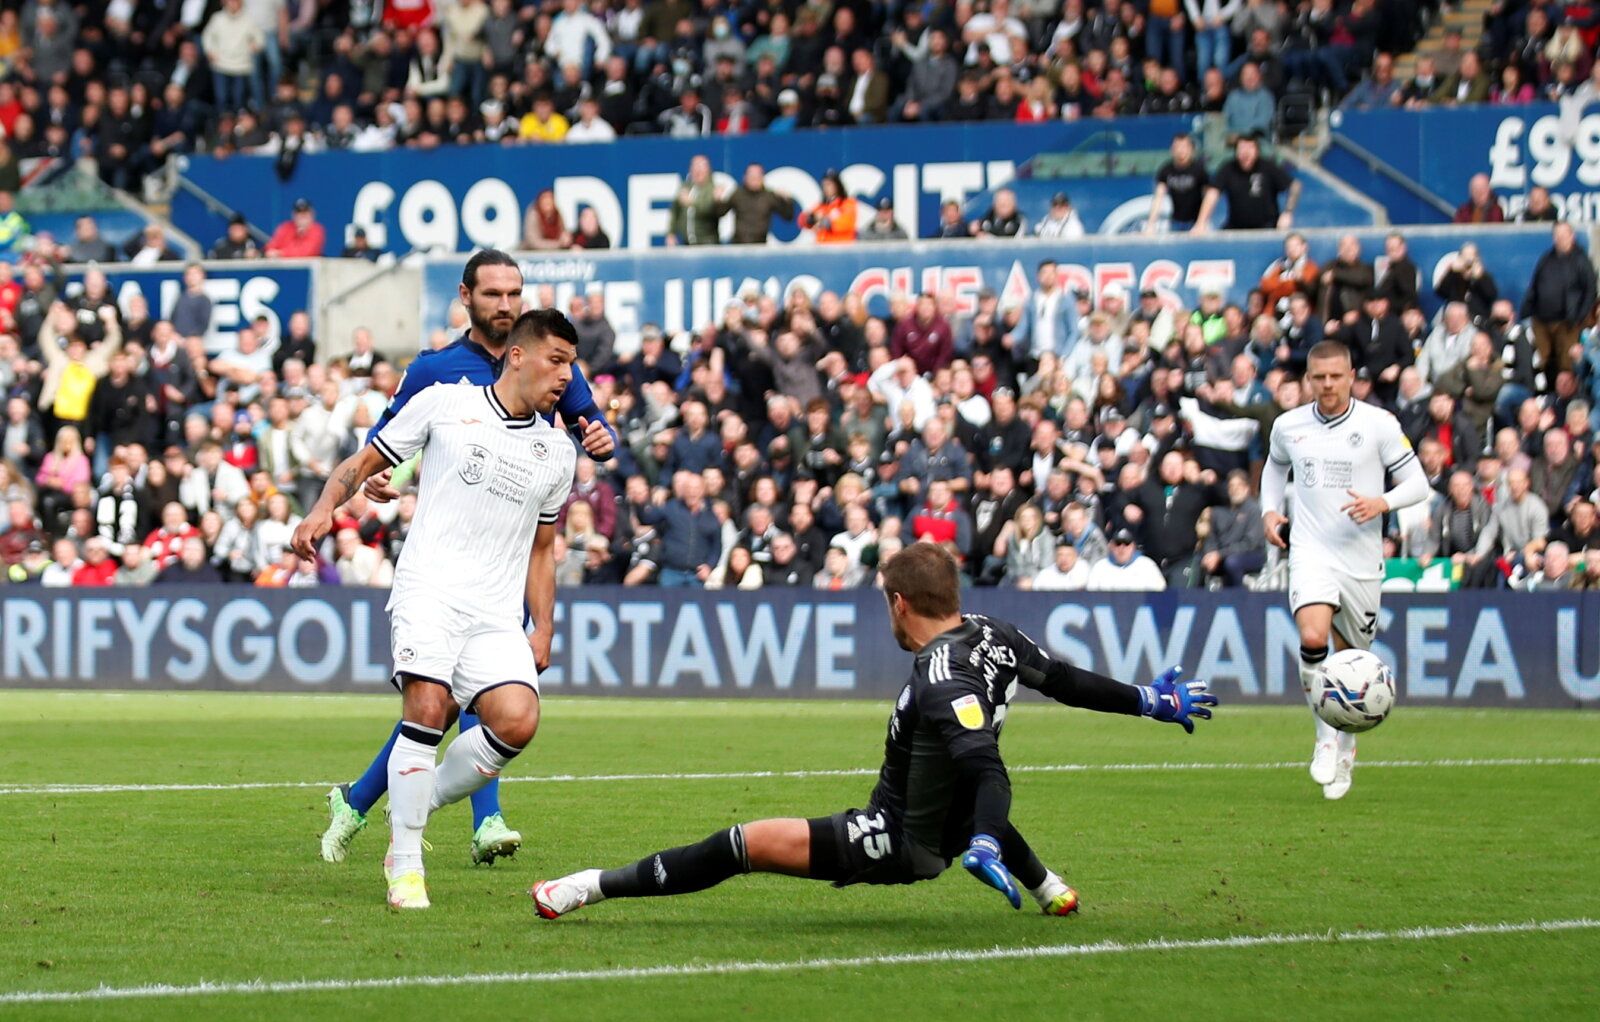 Soccer Football - Championship - Swansea City v Cardiff City - Liberty Stadium, Swansea, Wales, Britain - October 17, 2021 Swansea City's Joel Piroe scores their second goal Action Images/Andrew Boyers  EDITORIAL USE ONLY. No use with unauthorized audio, video, data, fixture lists, club/league logos or 